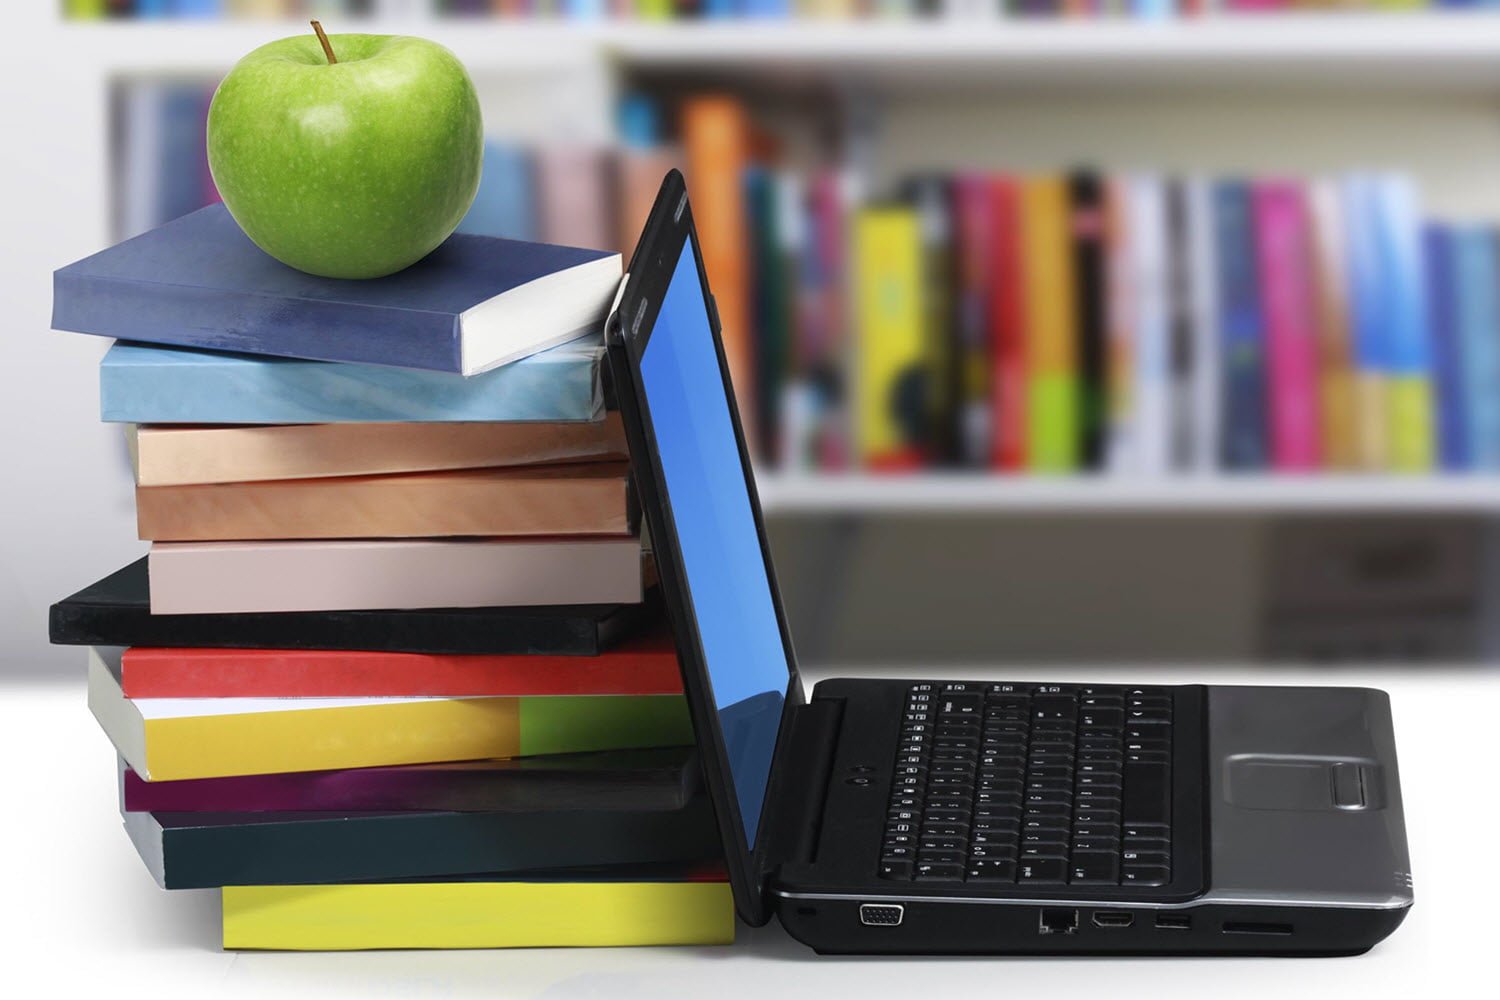 An apple on top of stacked books next to a laptop computer